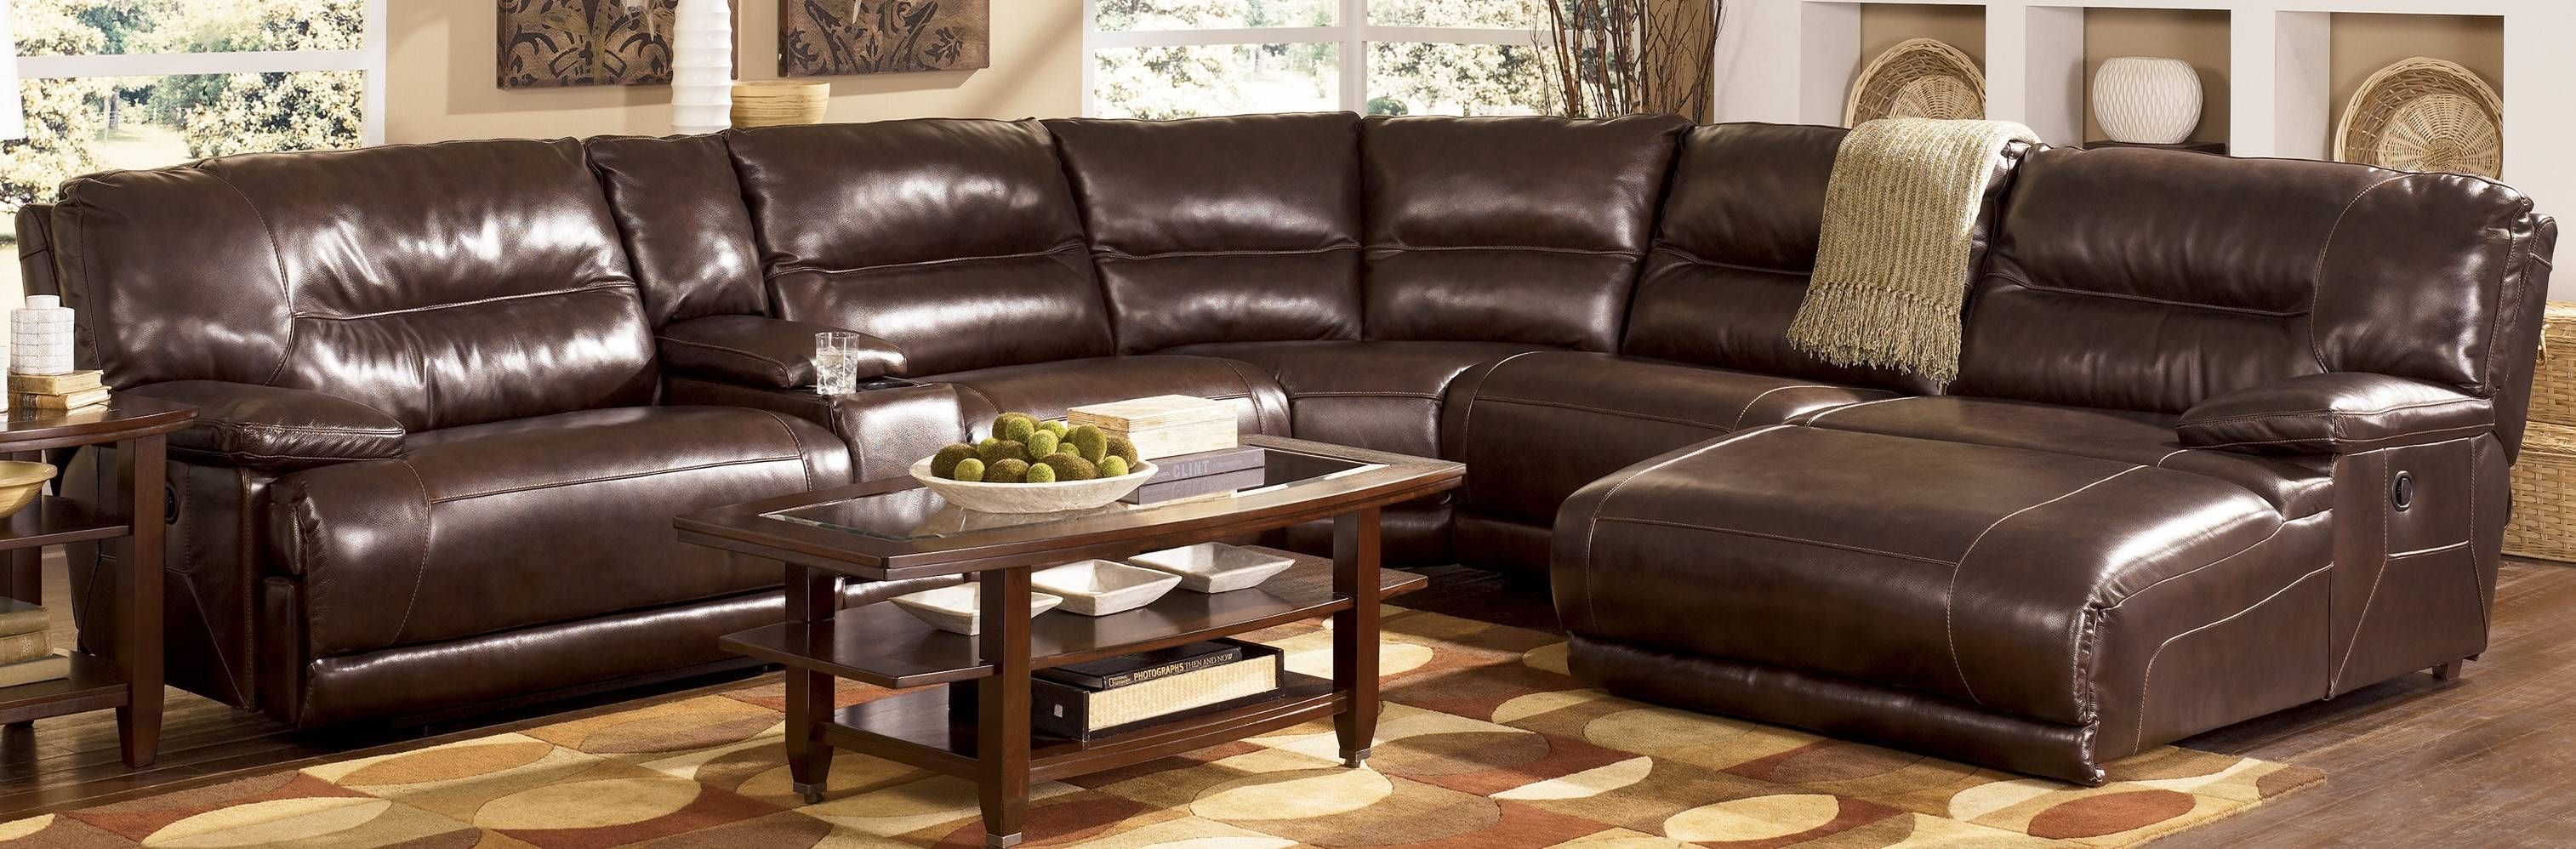 Inspiring Leather Sectional Sofas With Recliners And Chaise 23 For With Regard To Down Filled Sofa Sectional (View 15 of 25)